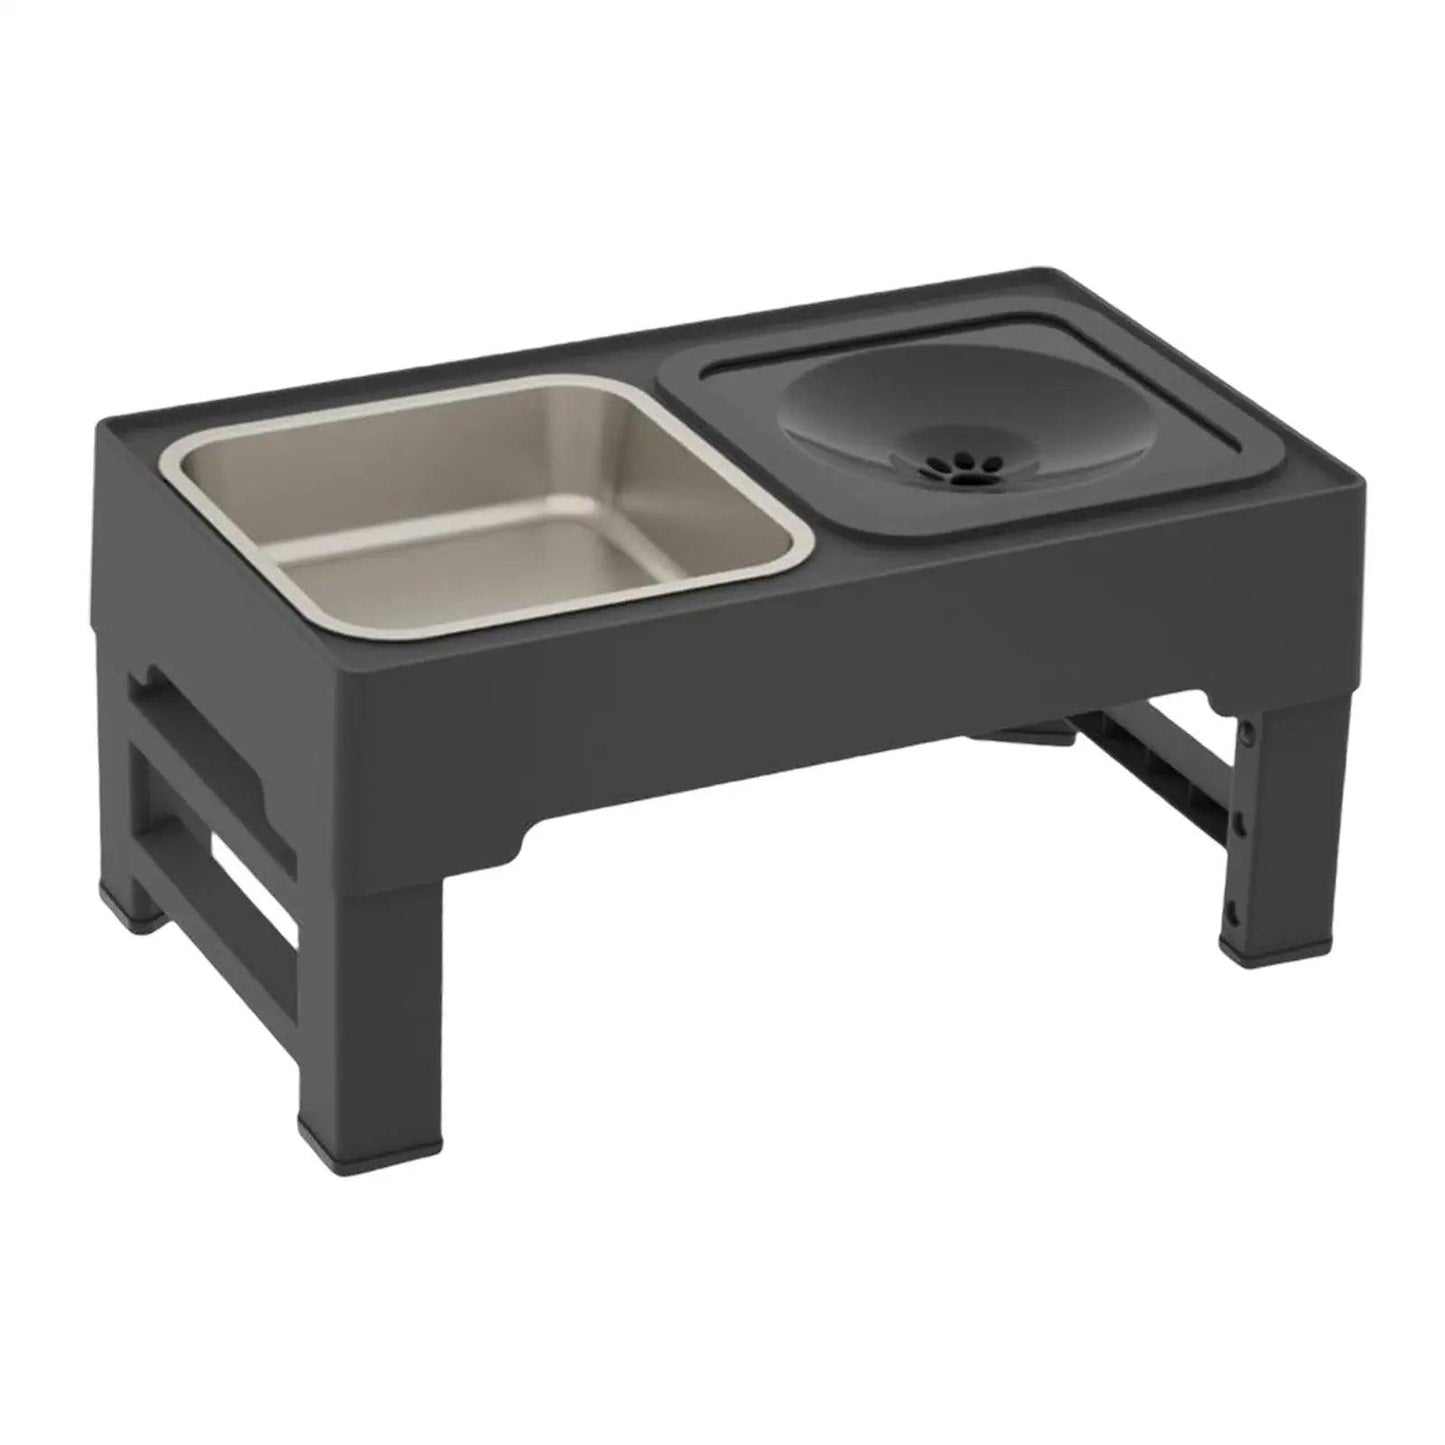 Elevated Mess-Free Dog Bowl - THE TRENDZ HIVE 